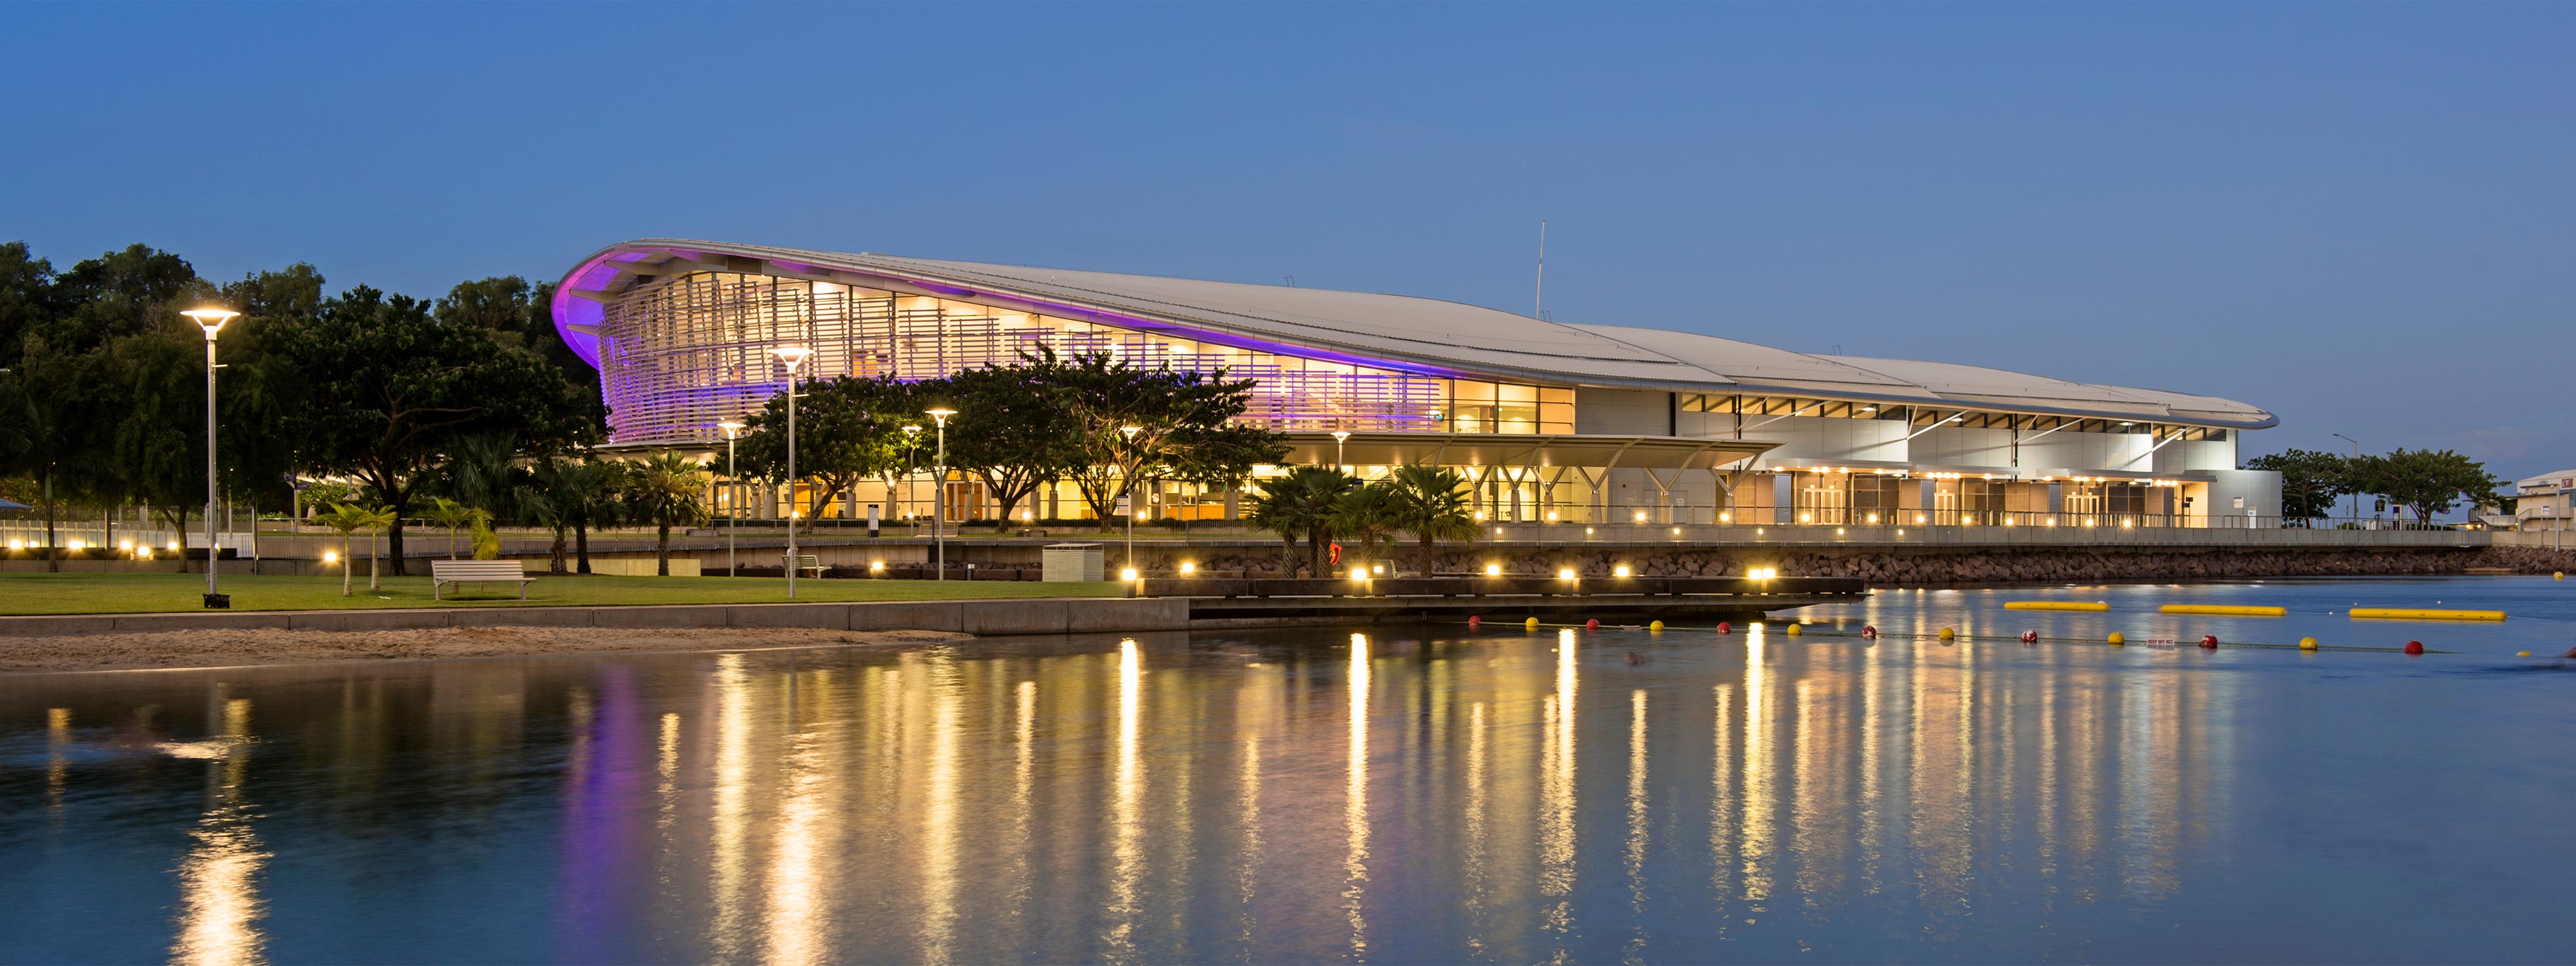 DARWIN CONVENTION CENTRE WINS BUSINESS EXCELLENCE AWARDS